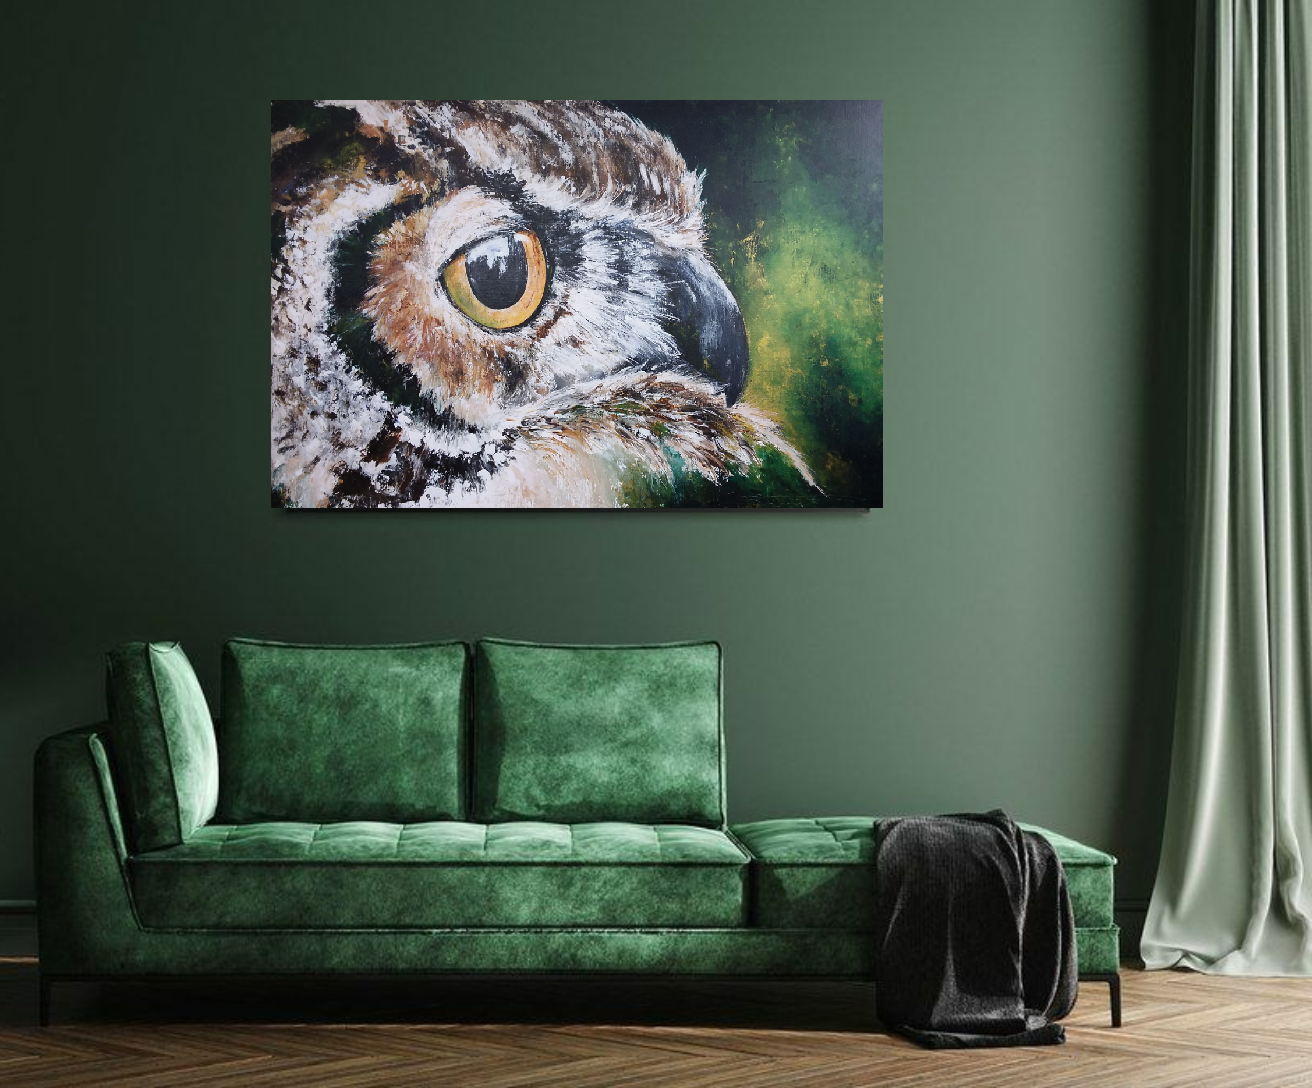 "OwlVission" 80×120 GlowEdition available